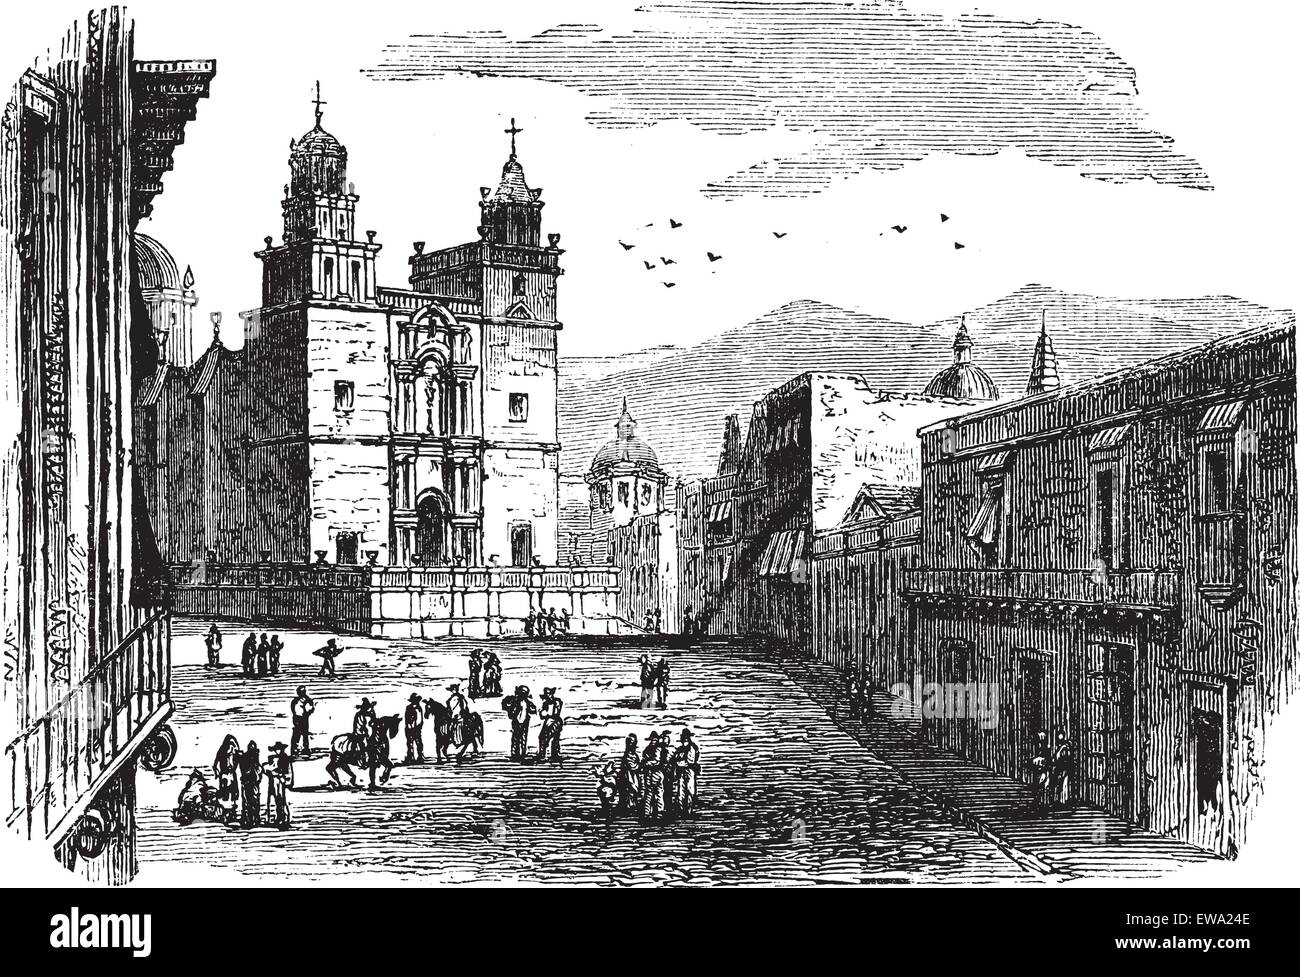 Cathedral at Guanajuato vintage engraving. Old engraved illustration of historic cathedral building at Guanajuato, 1890s. Stock Vector